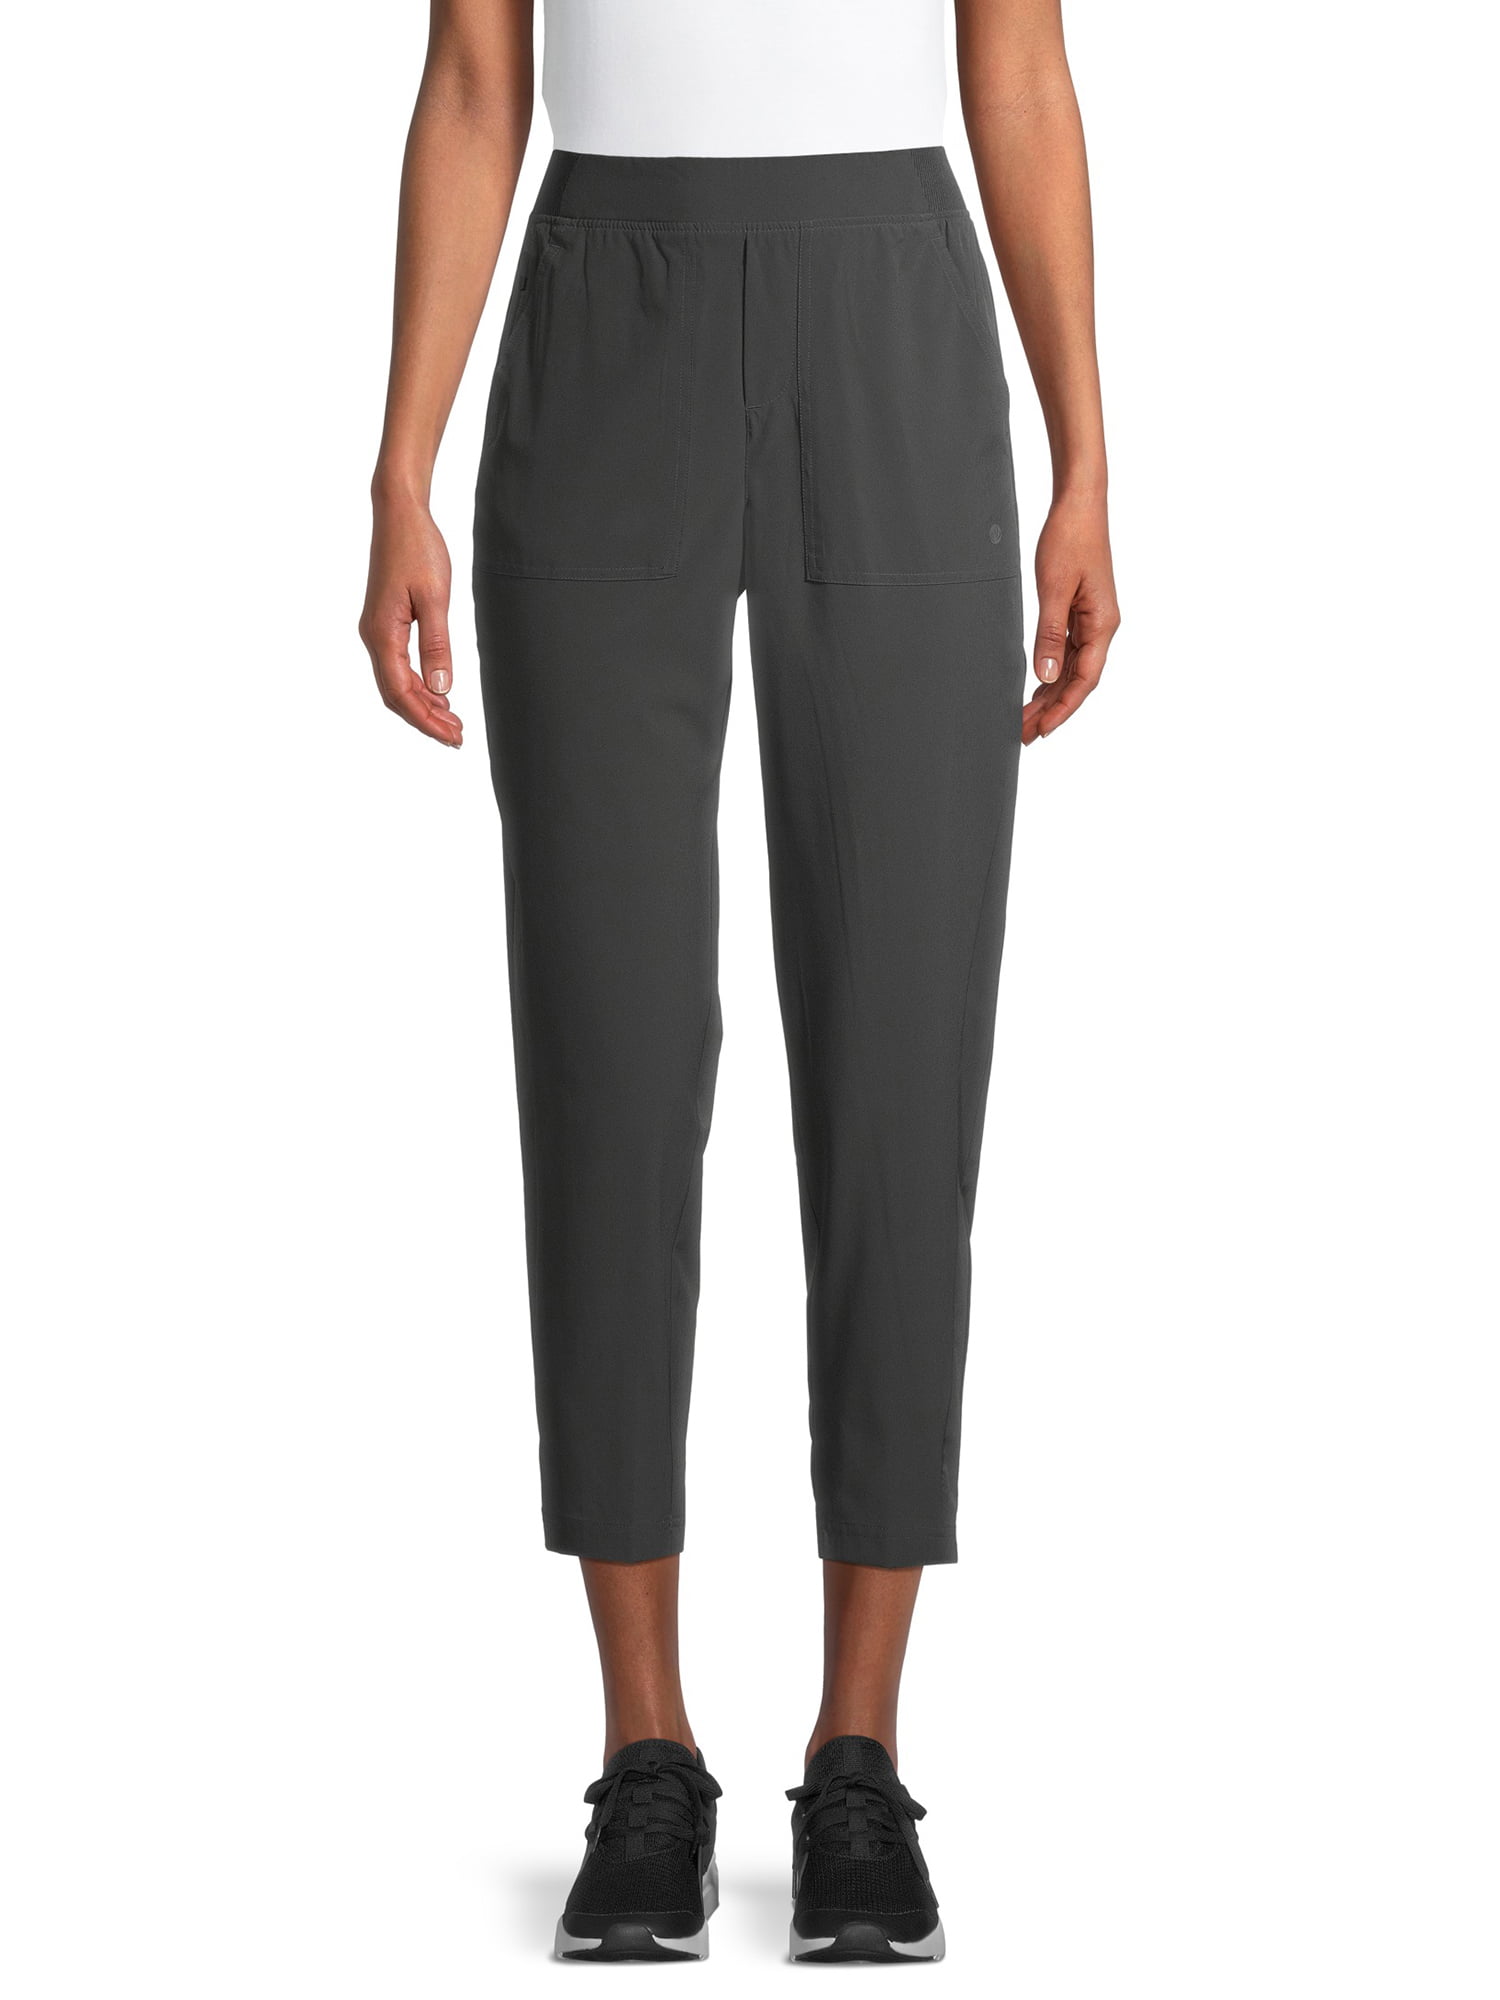 Apana, Pants & Jumpsuits, Apana Size Medium Black Track Pants With Two  Side Pockets And Elasticized Cuffs